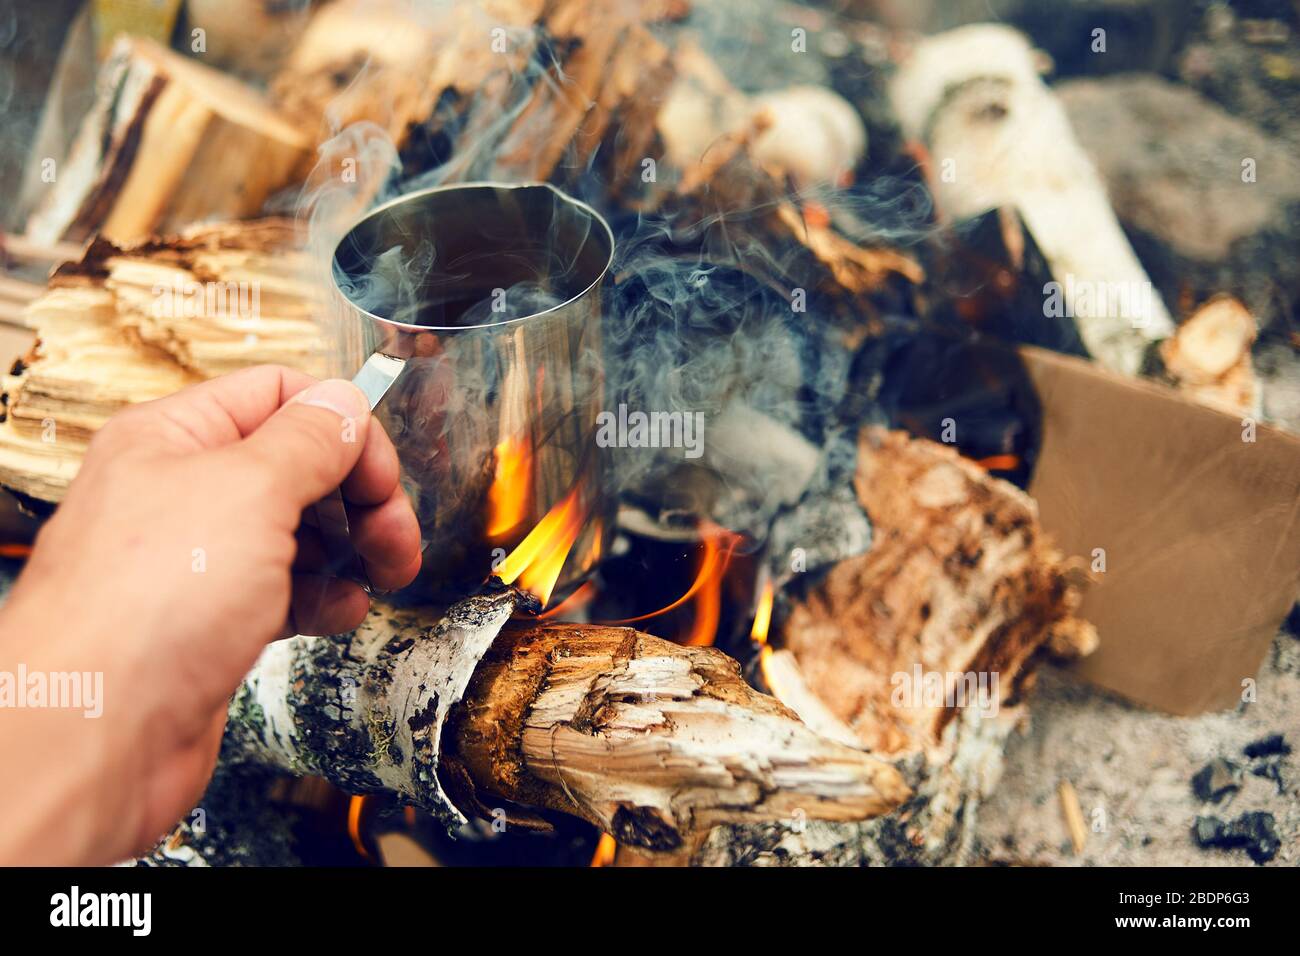 https://c8.alamy.com/comp/2BDP6G3/man-traveler-hands-holding-cup-of-tea-near-the-fire-outdoors-hiker-drinking-tea-from-mug-at-camp-coffee-cooked-over-a-campfire-on-the-nature-2BDP6G3.jpg